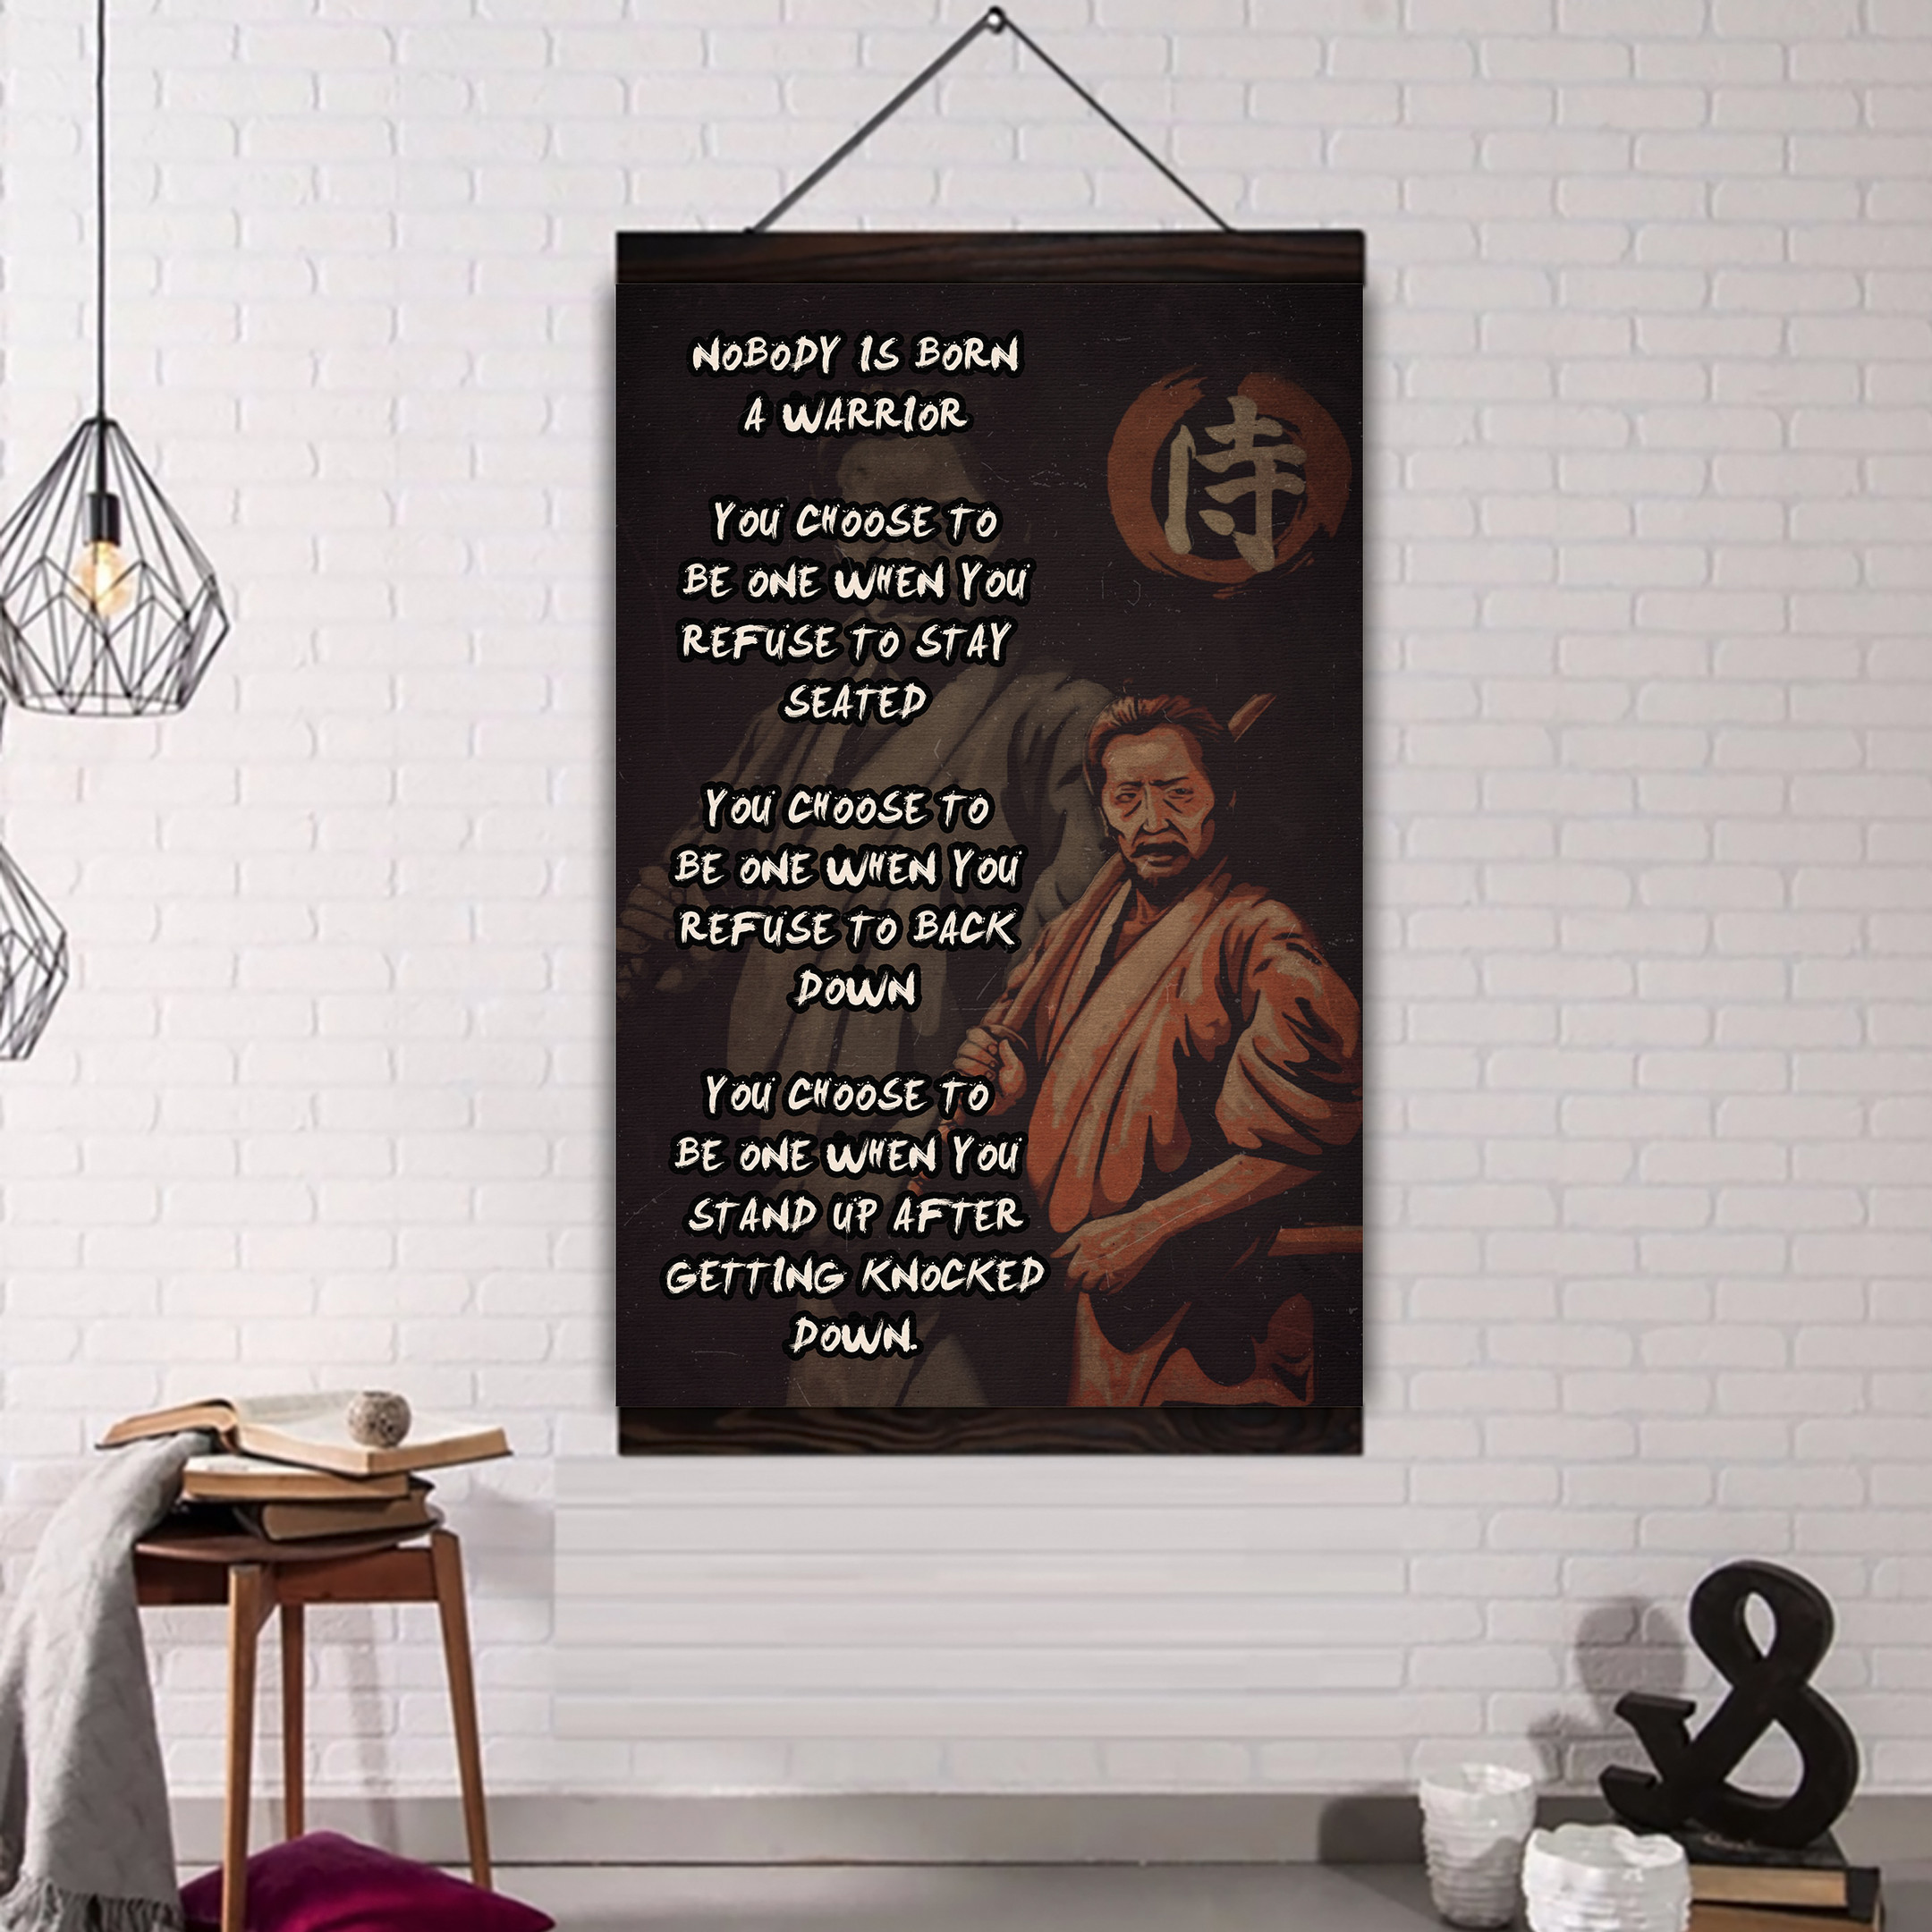 (Xh638) Samurai Poster, Canvas - Nobody Is Born A Warrior - Free Shipping On Orders Over $75